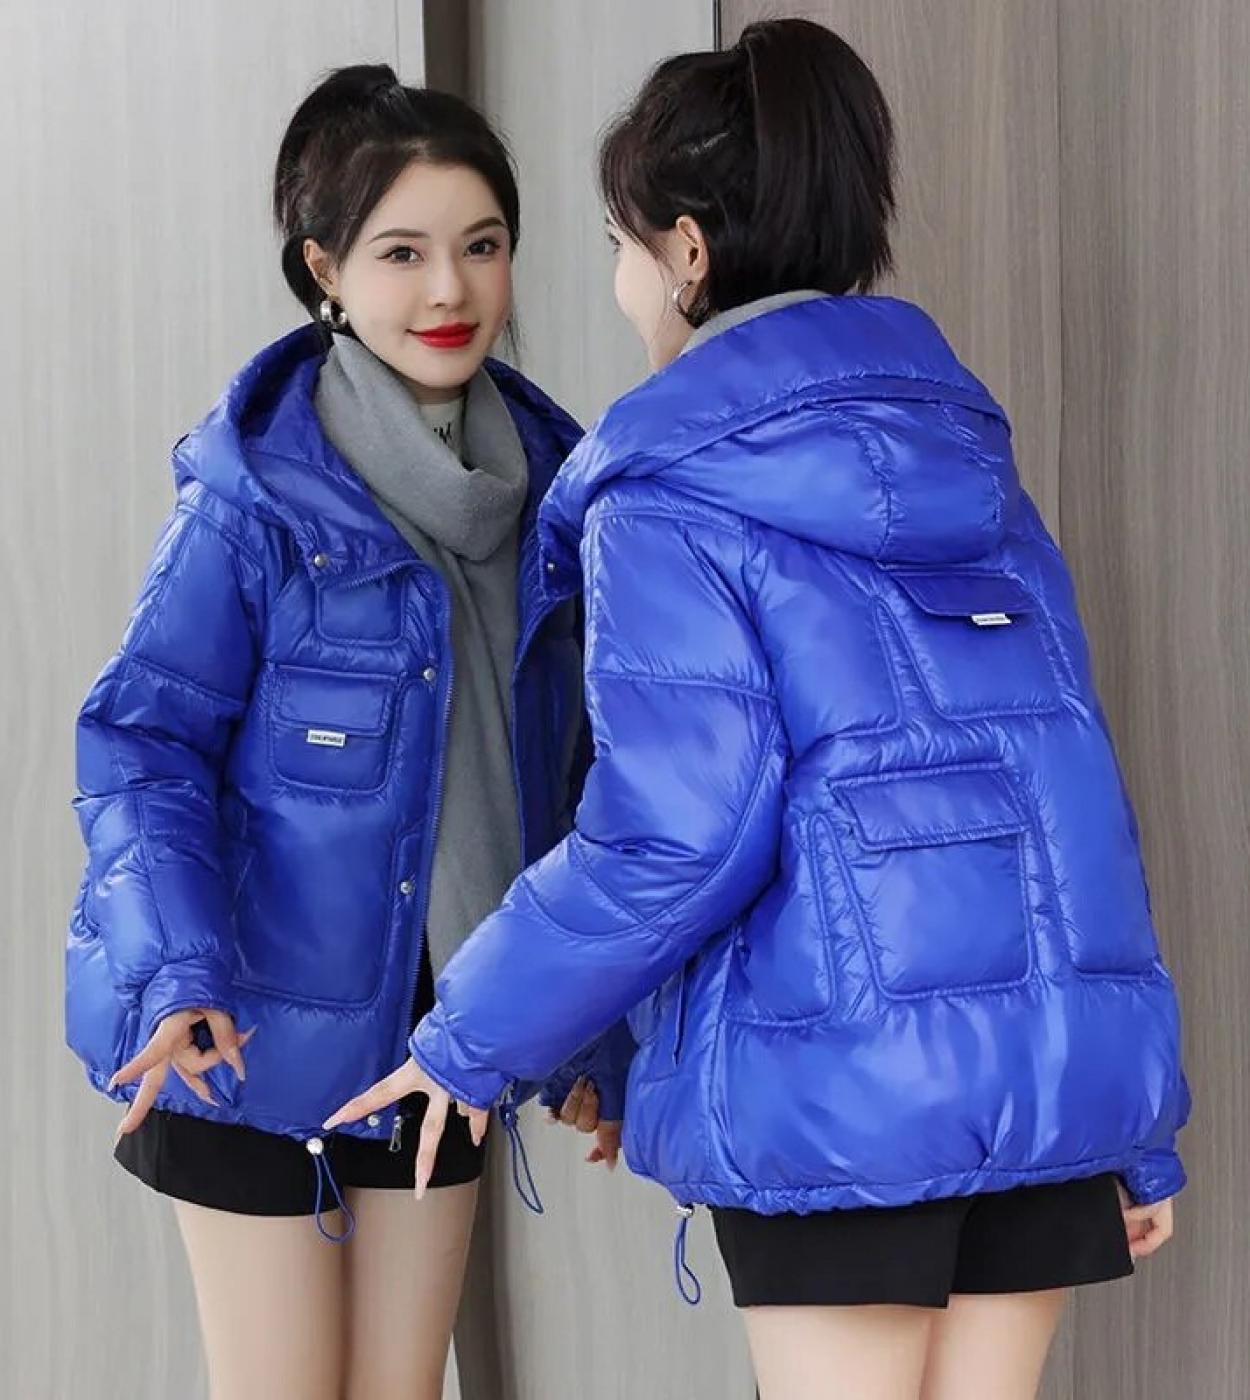 Fashion Parkas Hooded Jacket 2022 New Womens Winter Jacket Loose Cotton Padded Parka Student Coat Thicken Warm Outerwea